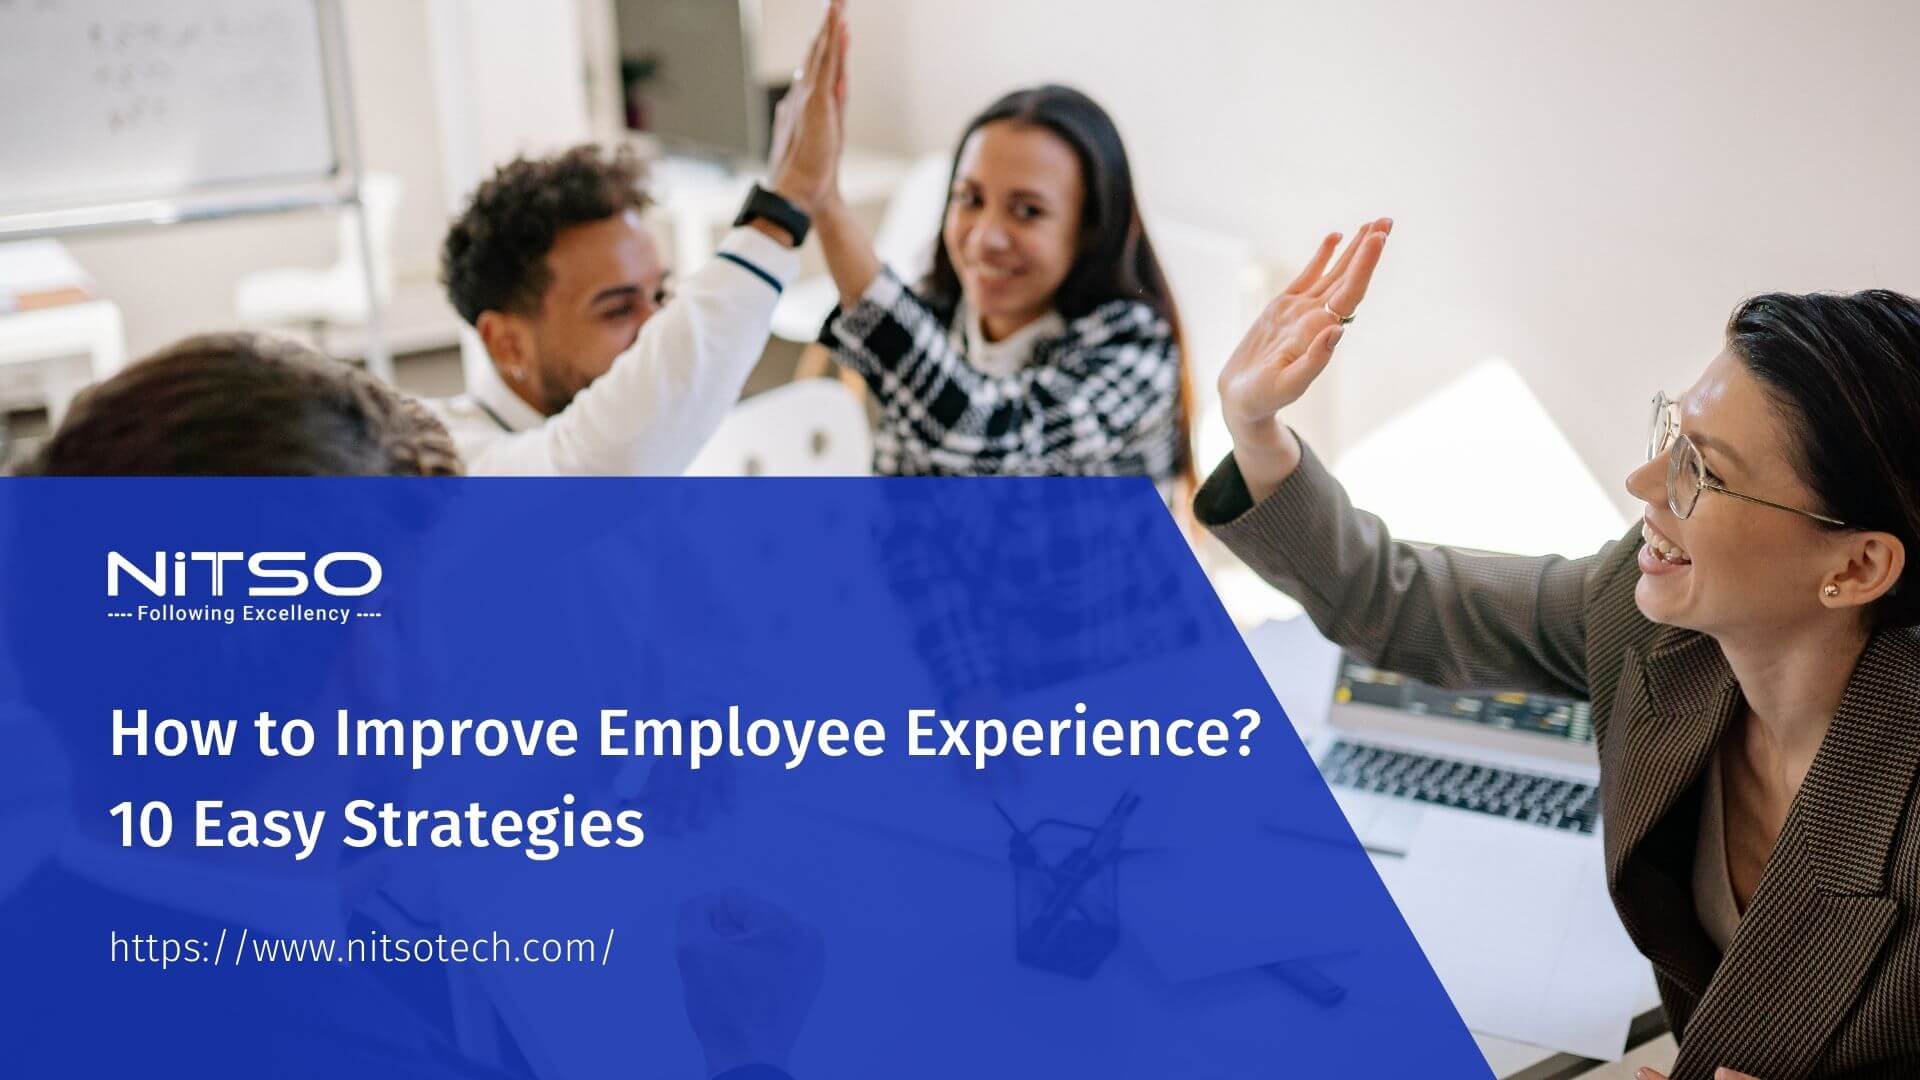 What are the Best Ways to Enhance Employee Experience?